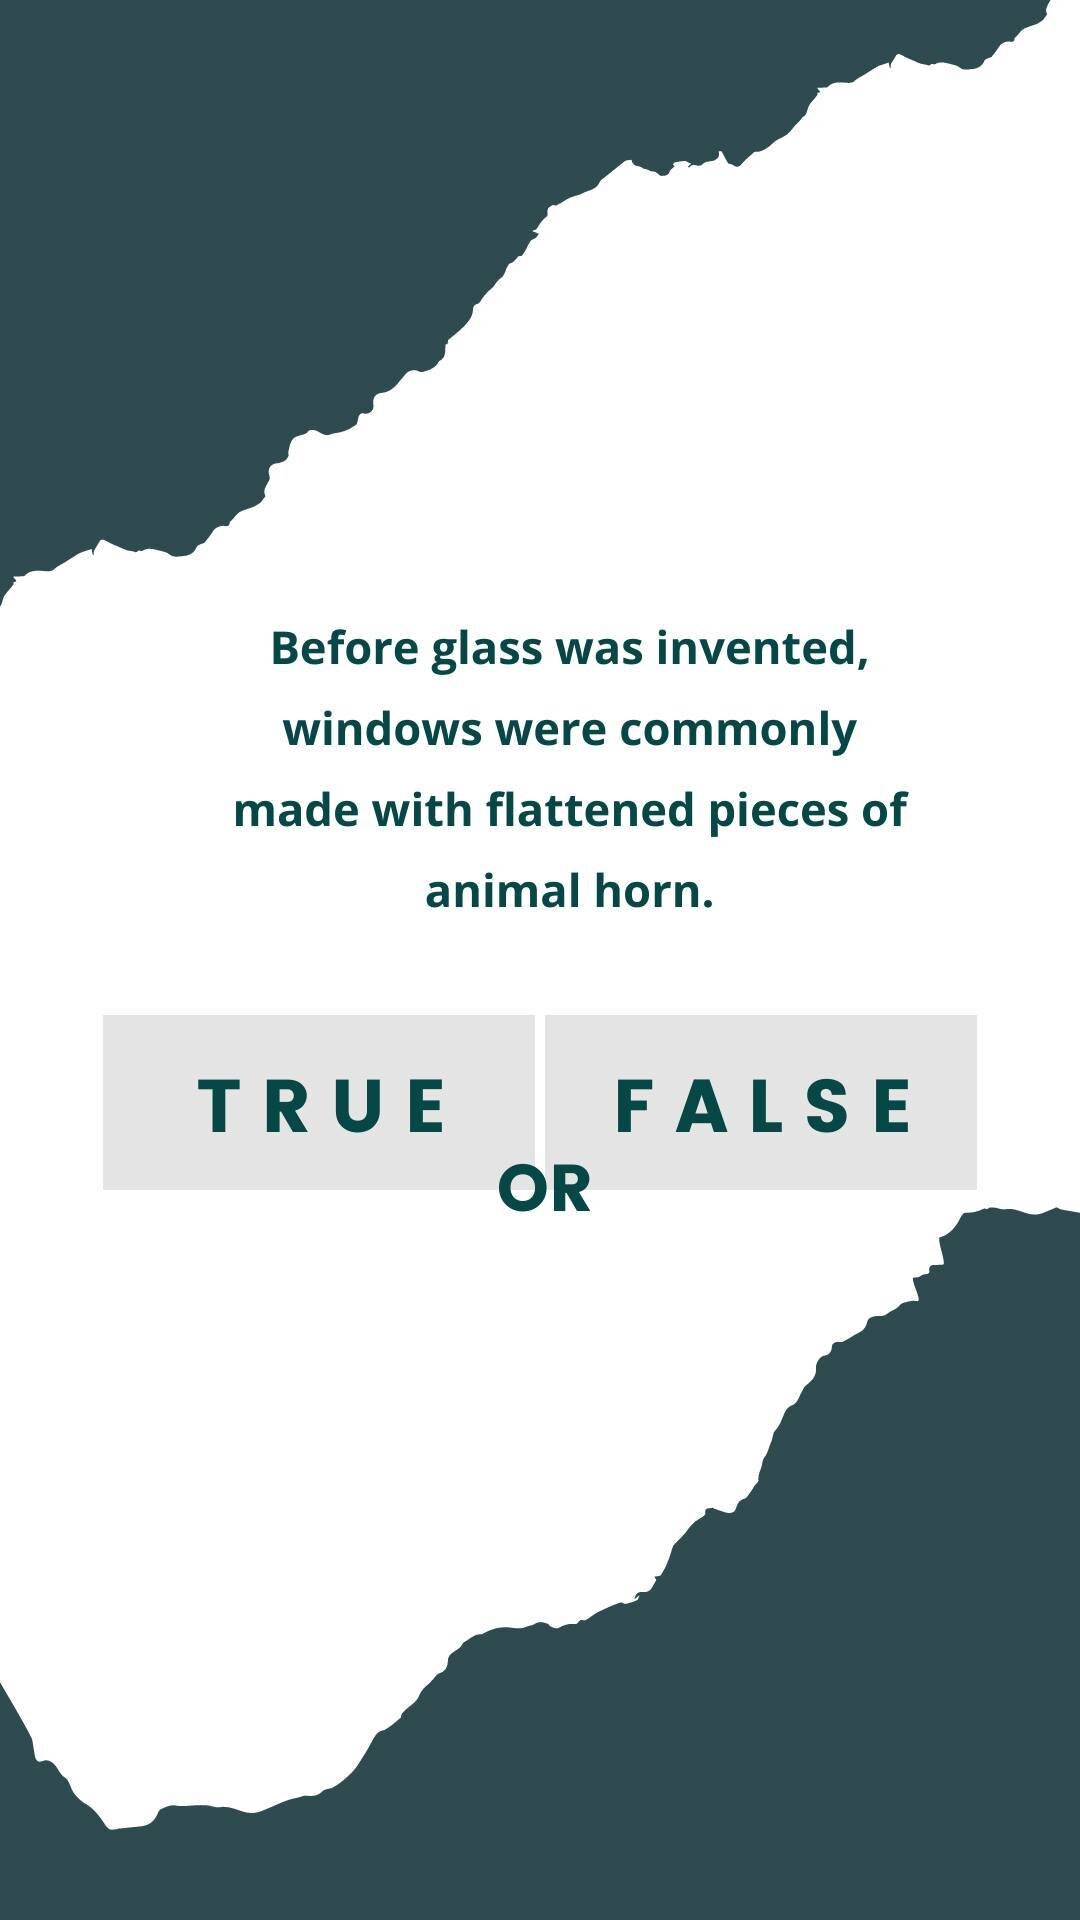 Before glass was invented, windows were commonly made with flattened pieces of animal horn. 

[true/false]